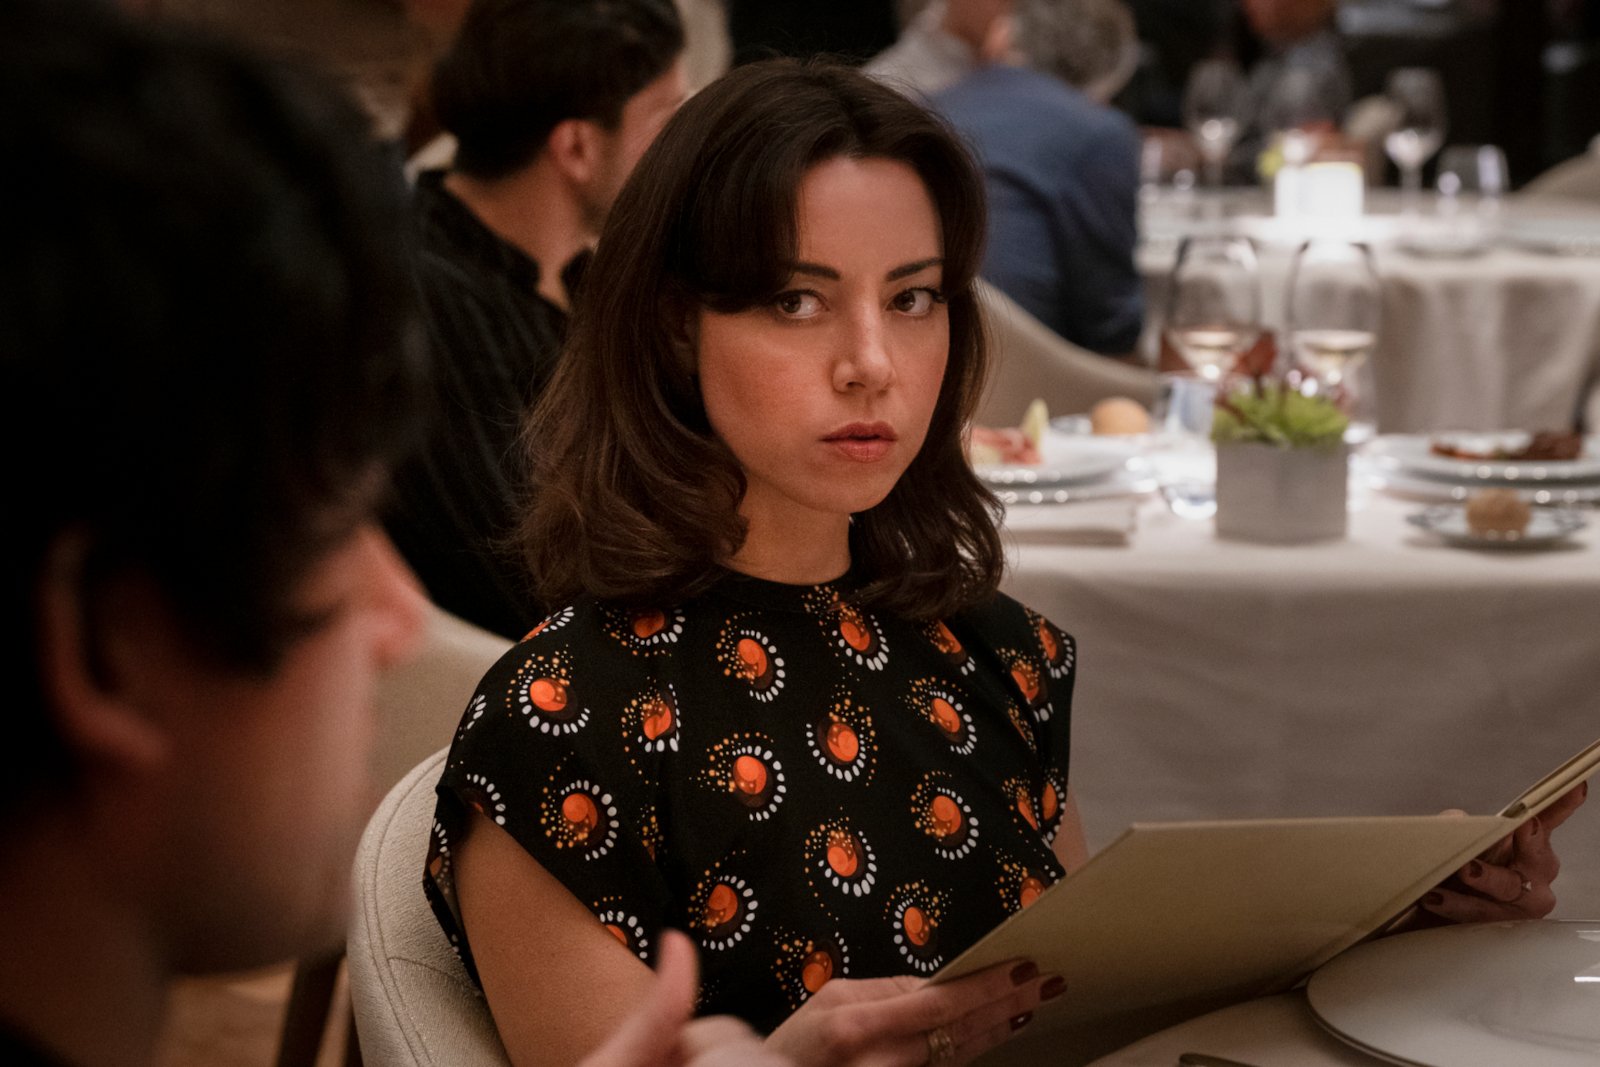 Actor Aubrey Plaza as Harper Spiller in 'The White Lotus' Season 2. She's sitting at a table, holding a menu, and glaring at the person across from her.